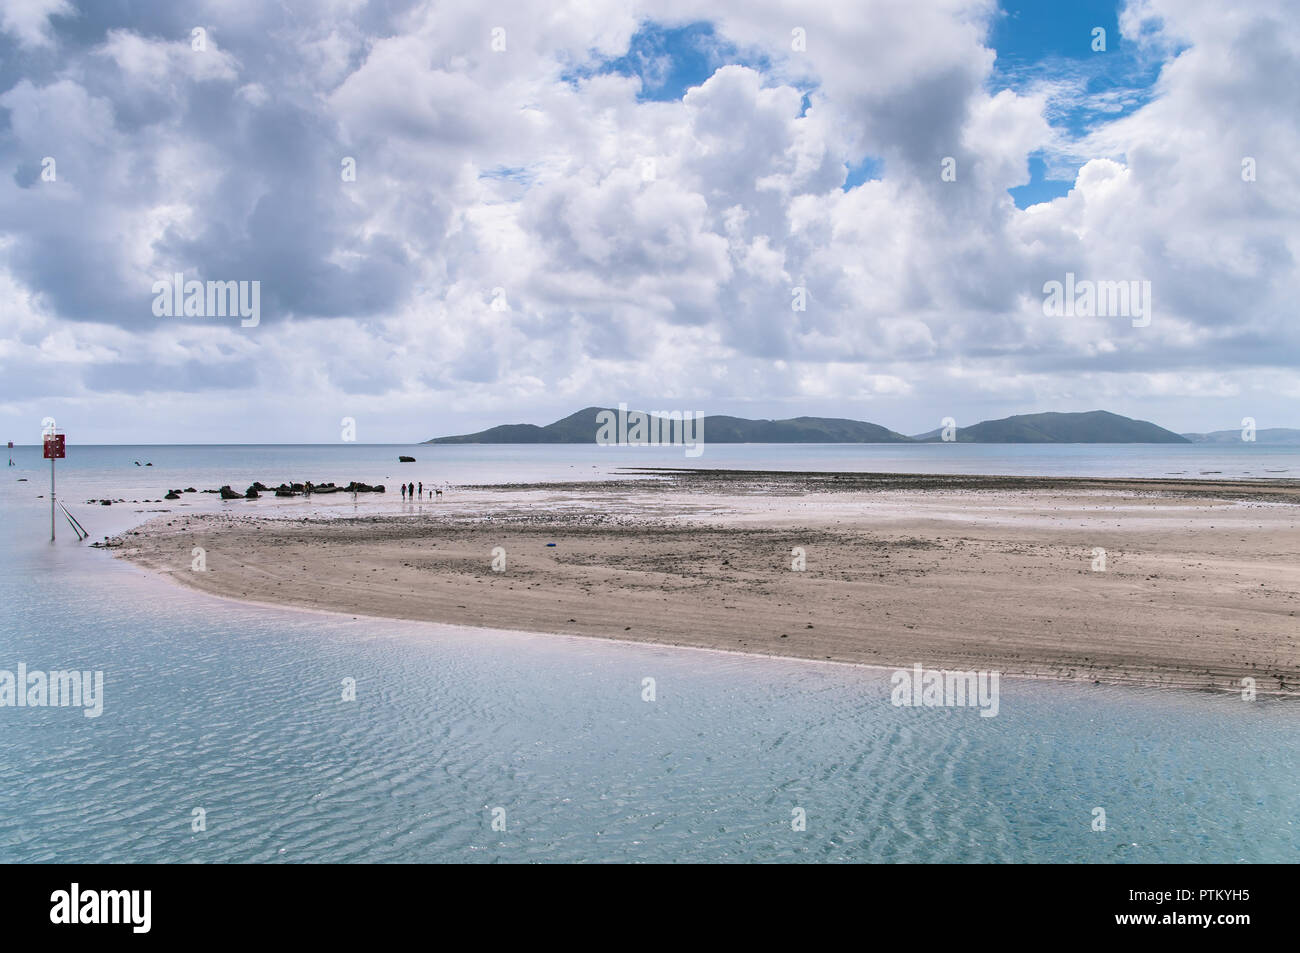 Low tide at Palm Island looking over the sand bar towards Fantome Island Stock Photo